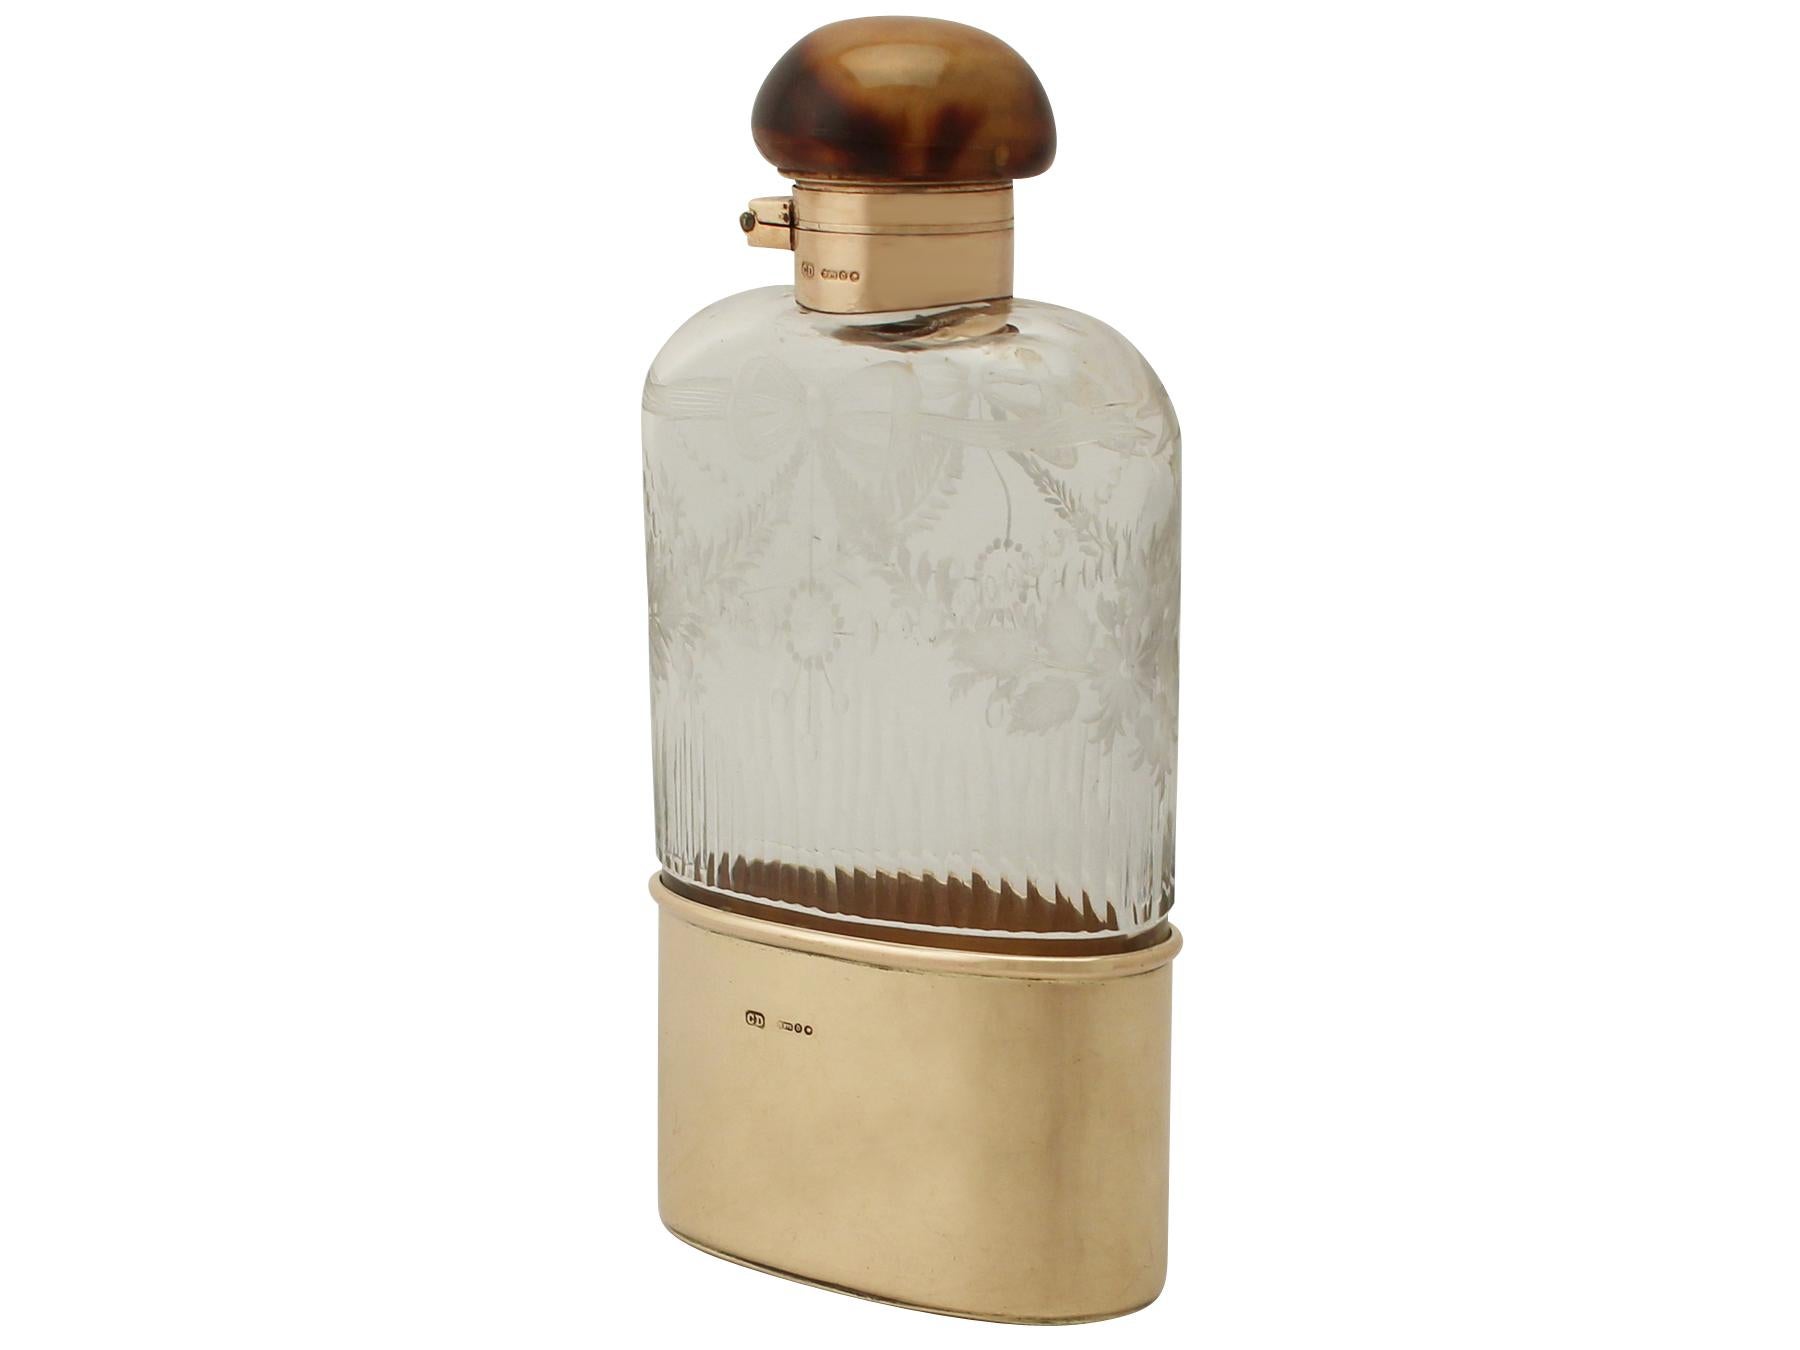 An exceptional, fine and impressive antique George V acid etched, cut glass and English 9 carat yellow gold hip flask; an addition to our silver mounted glass collection

This exceptional George V antique glass and silver hip flask has a